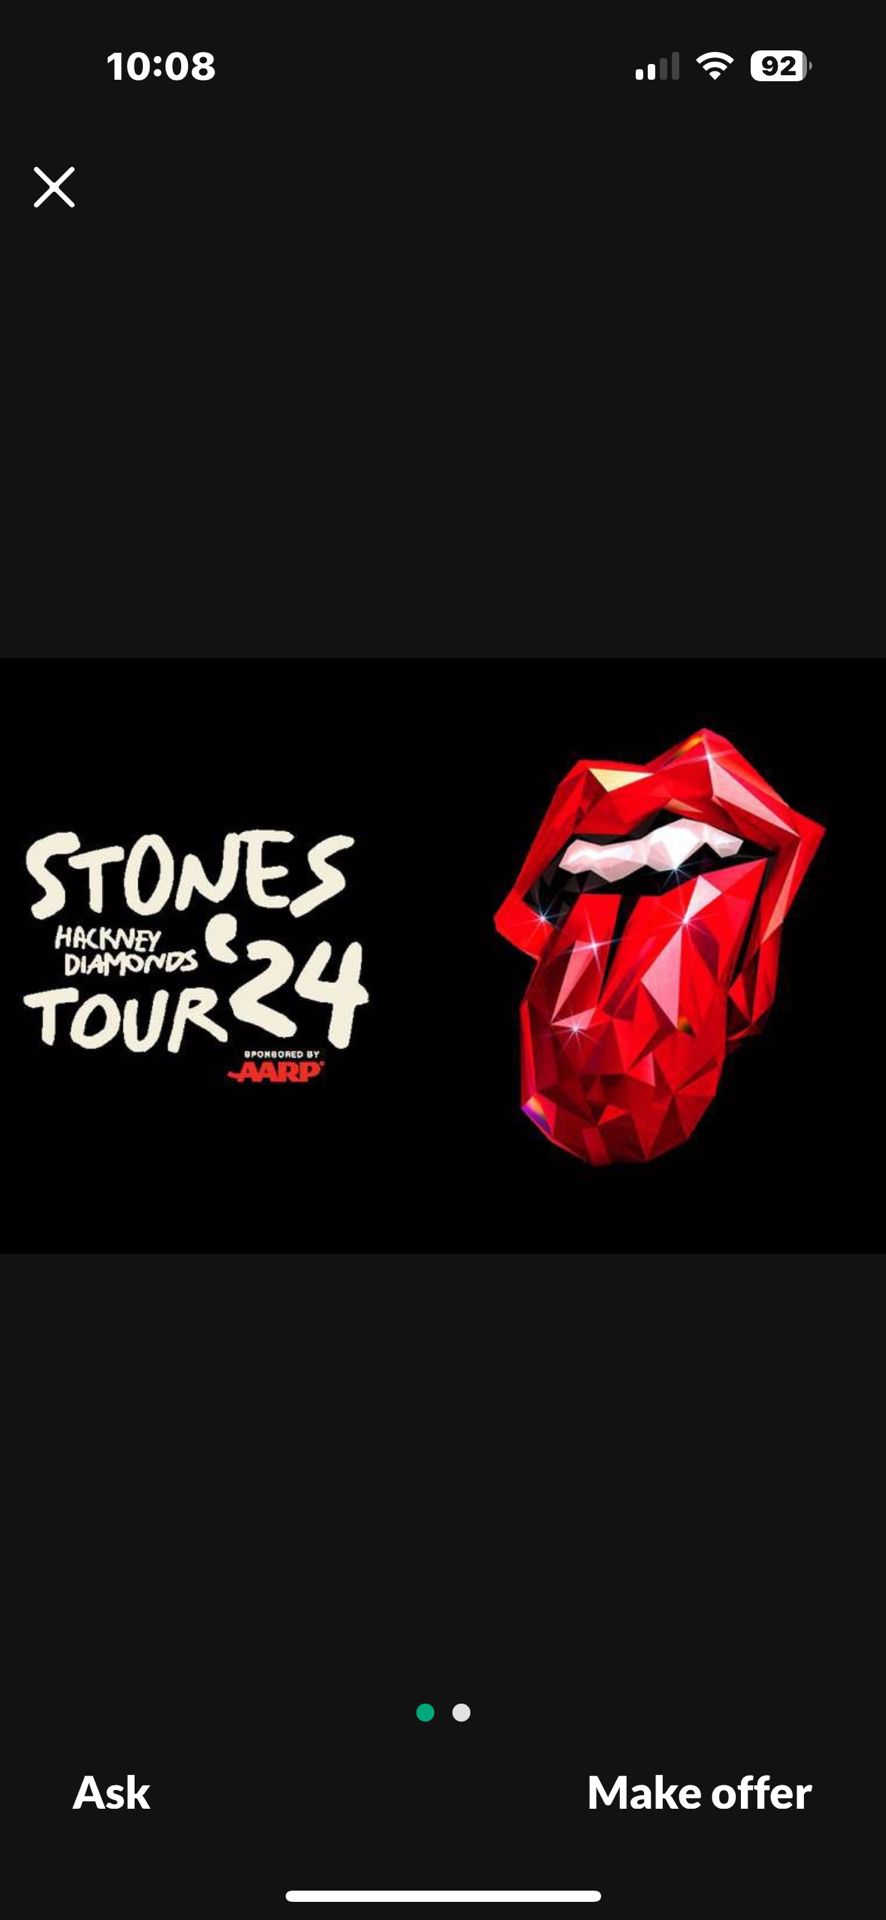 Rolling Stones Tickets